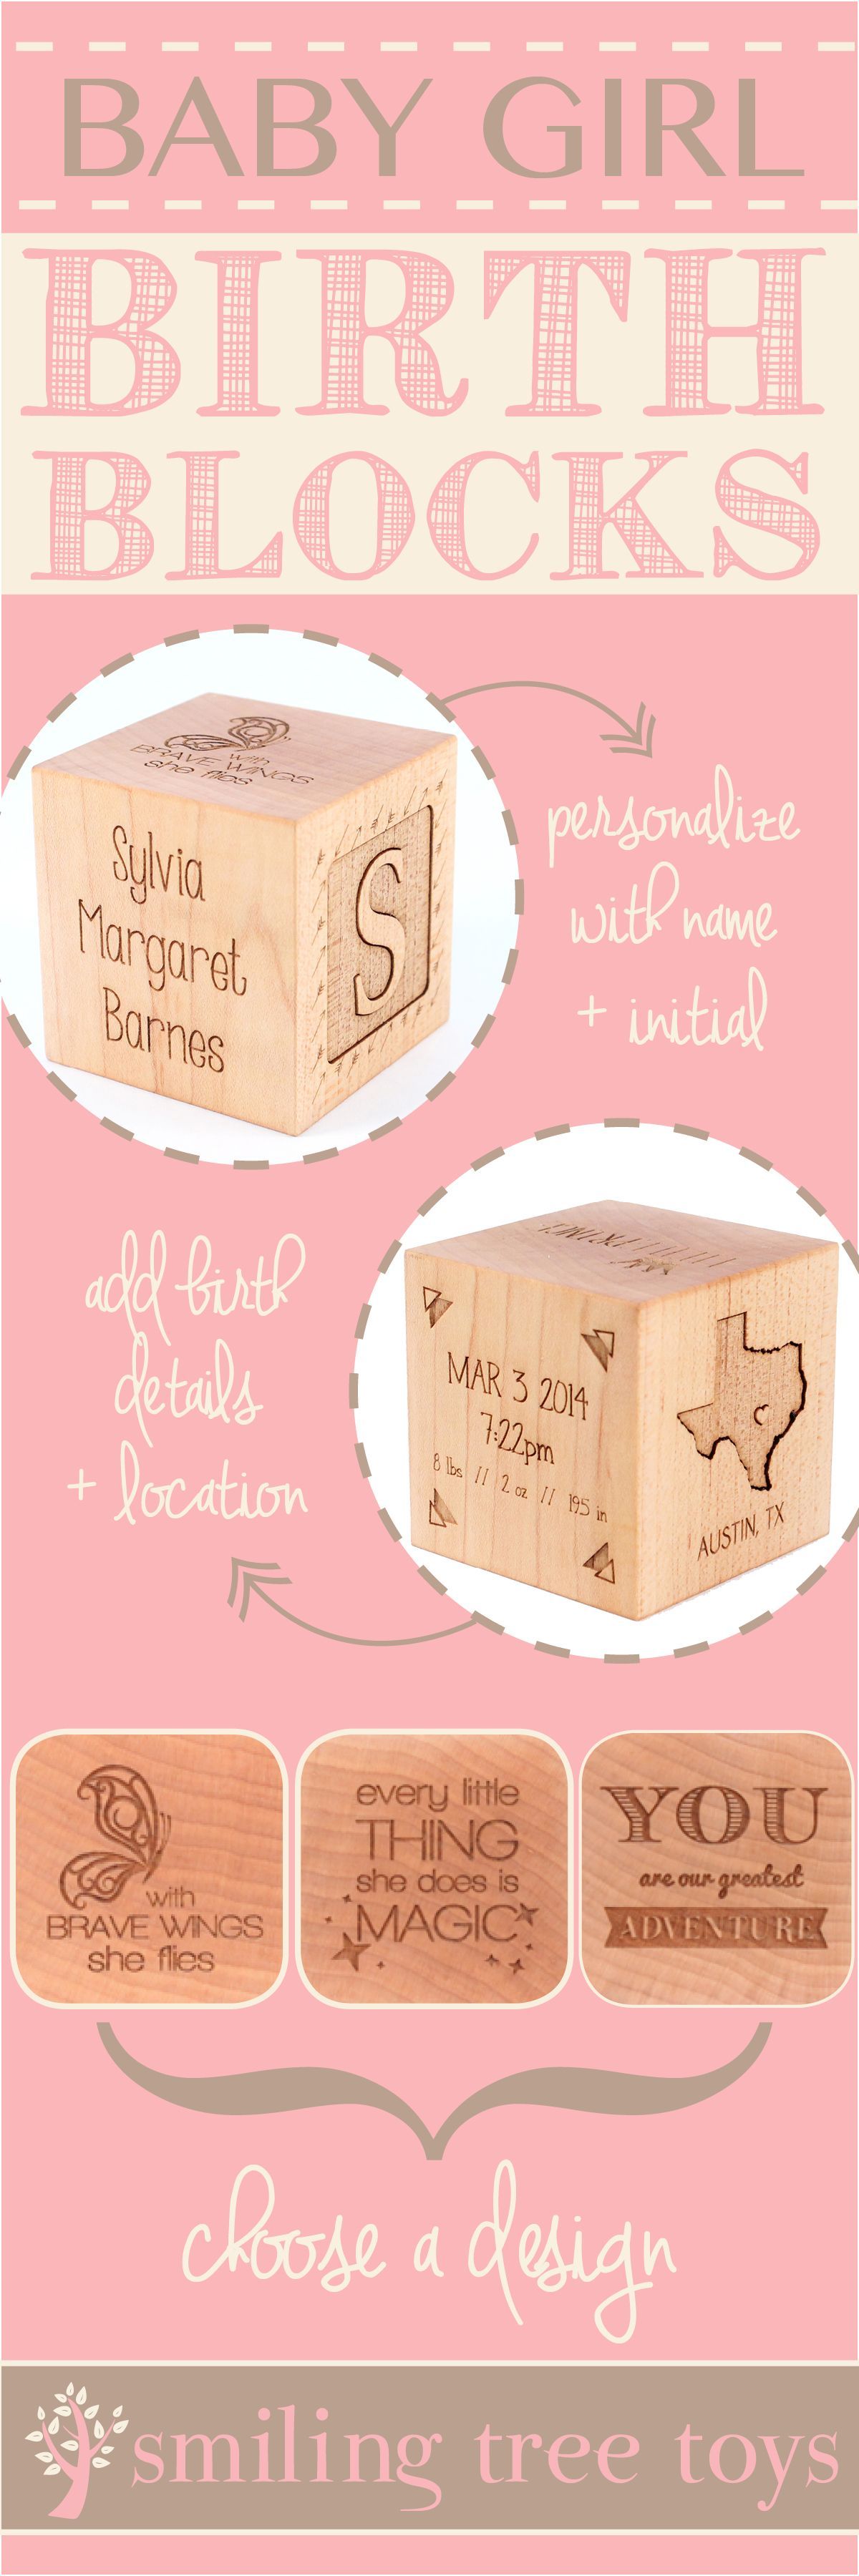 Keepsake Girl Birth Block // The perfect personalized, natural, heirloom gift celebrating baby girl’s birth // Smiling Tree Toys